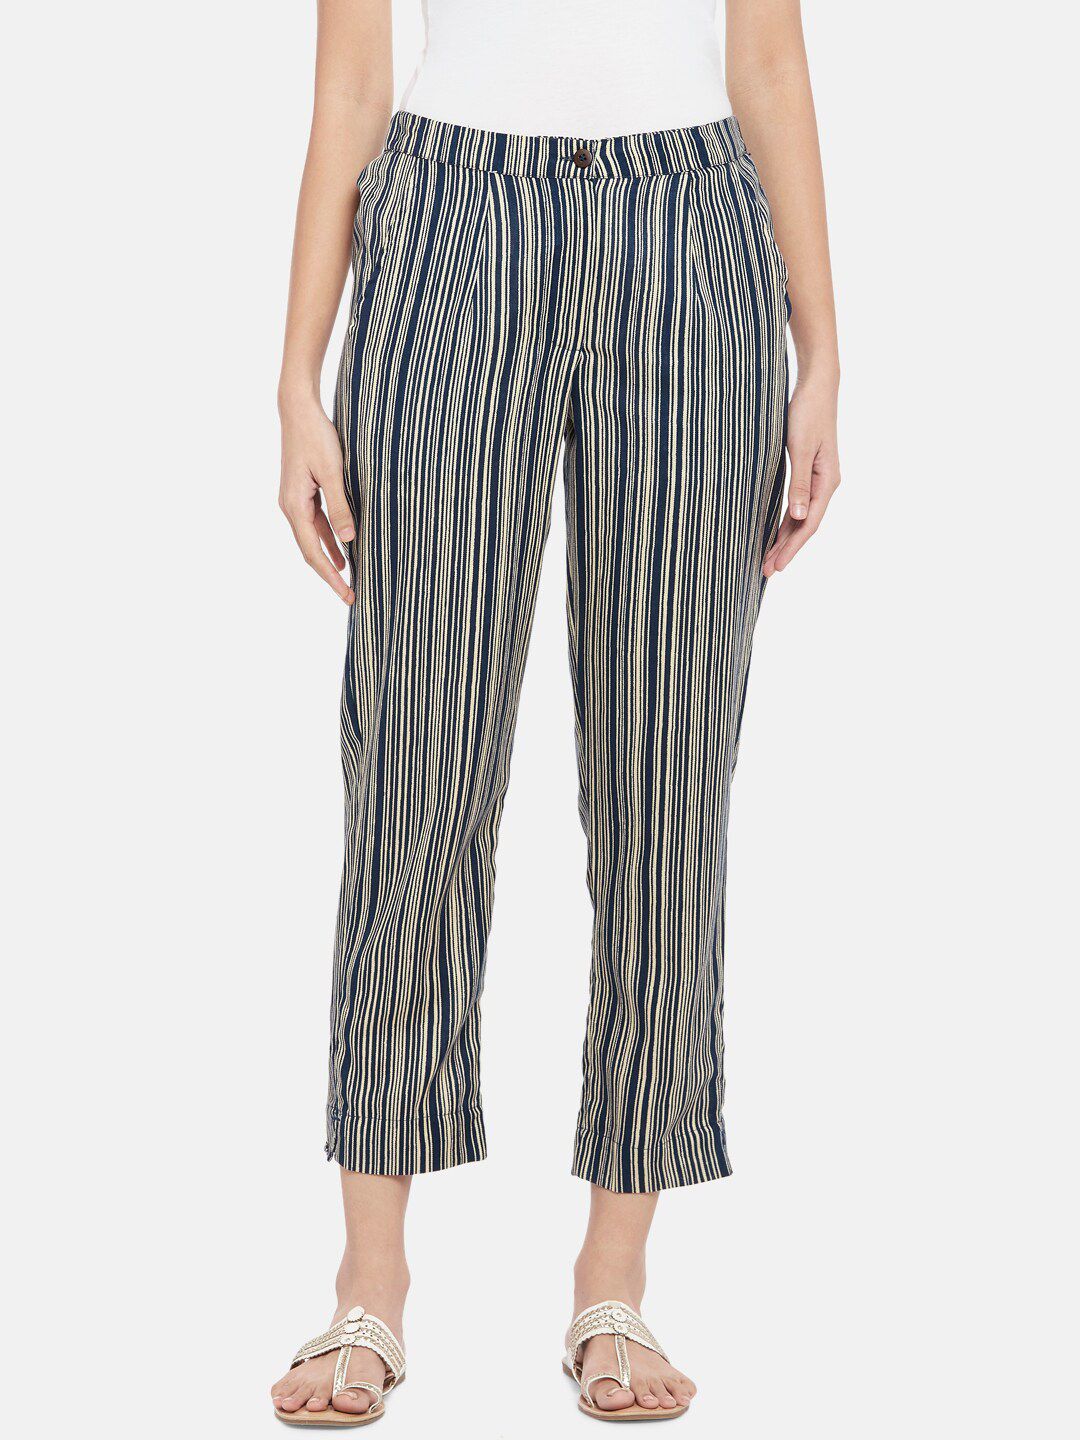 AKKRITI BY PANTALOONS Women Blue Striped Trousers Price in India